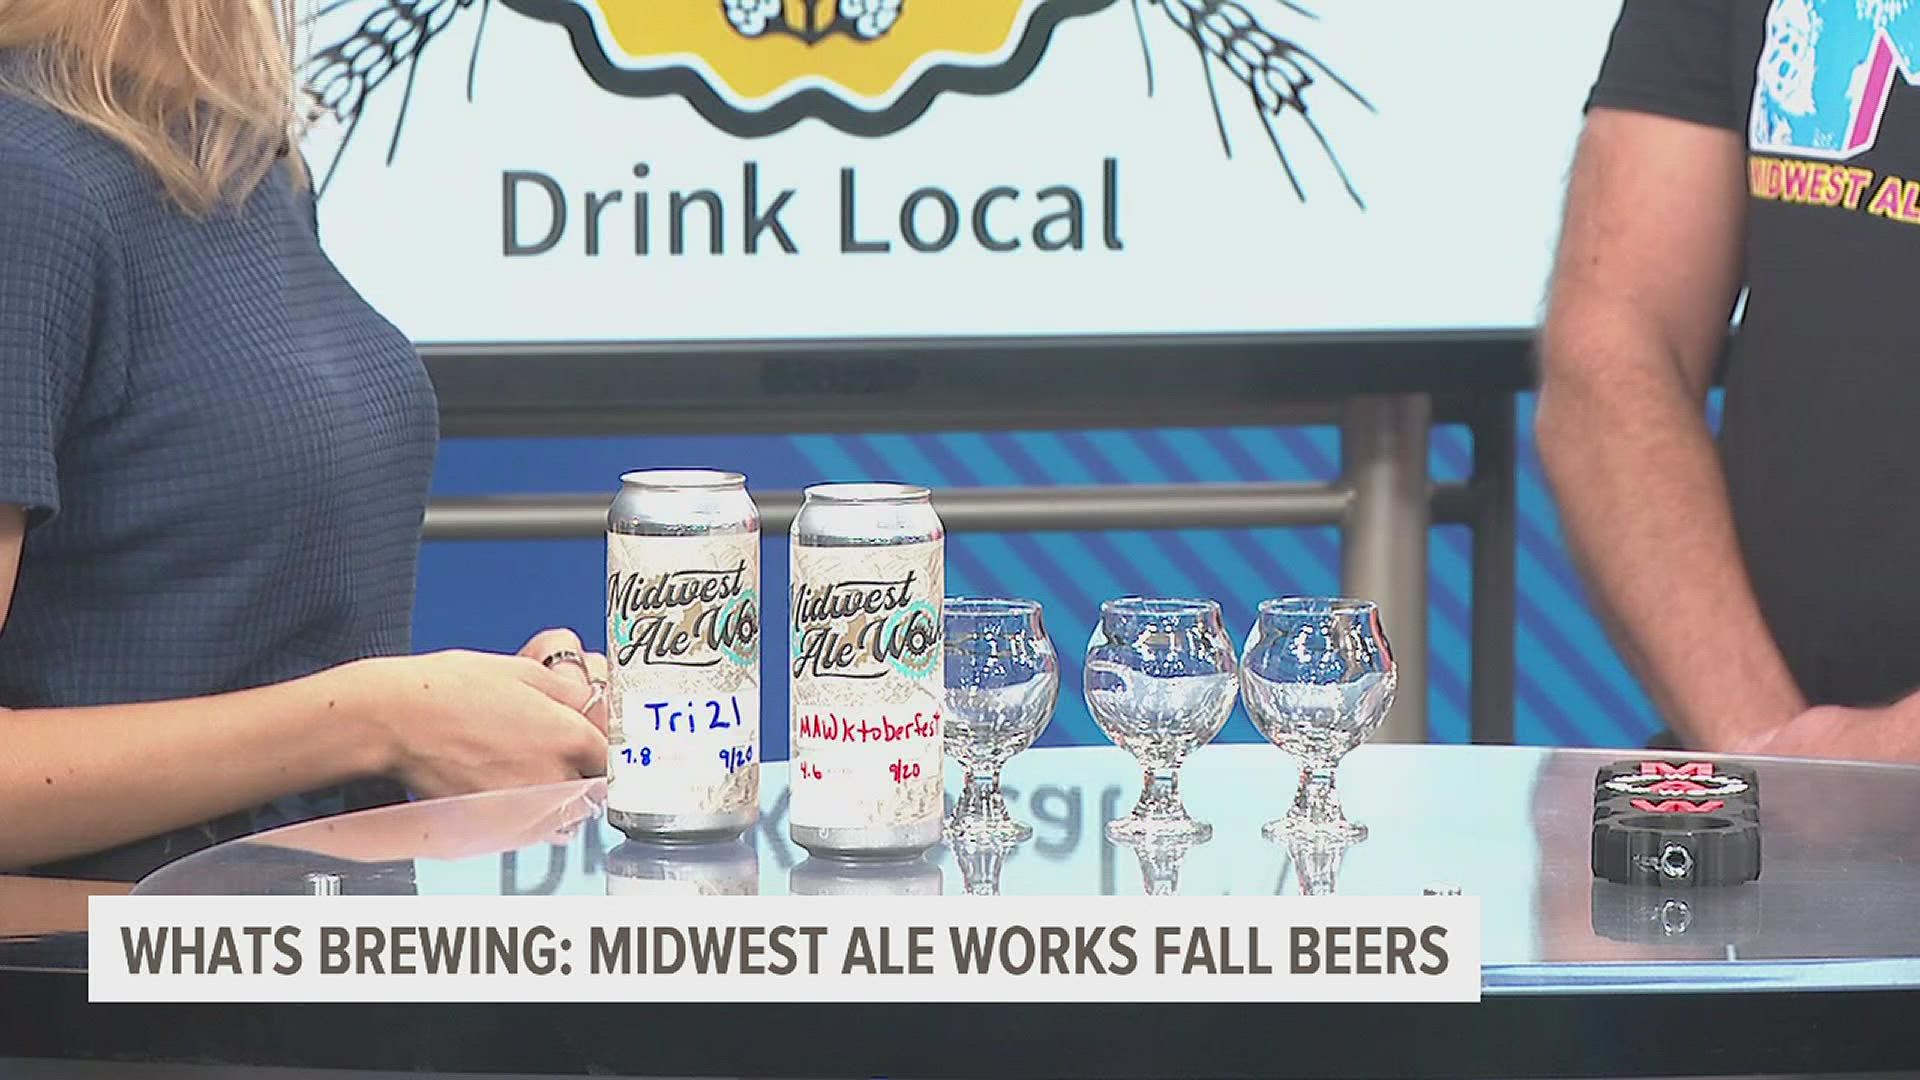 News 8's Shelby Kluver met with Midwest Ale Works co-owners Steve Sears & Clark Miljush to highlight the seasonal beers on tap.